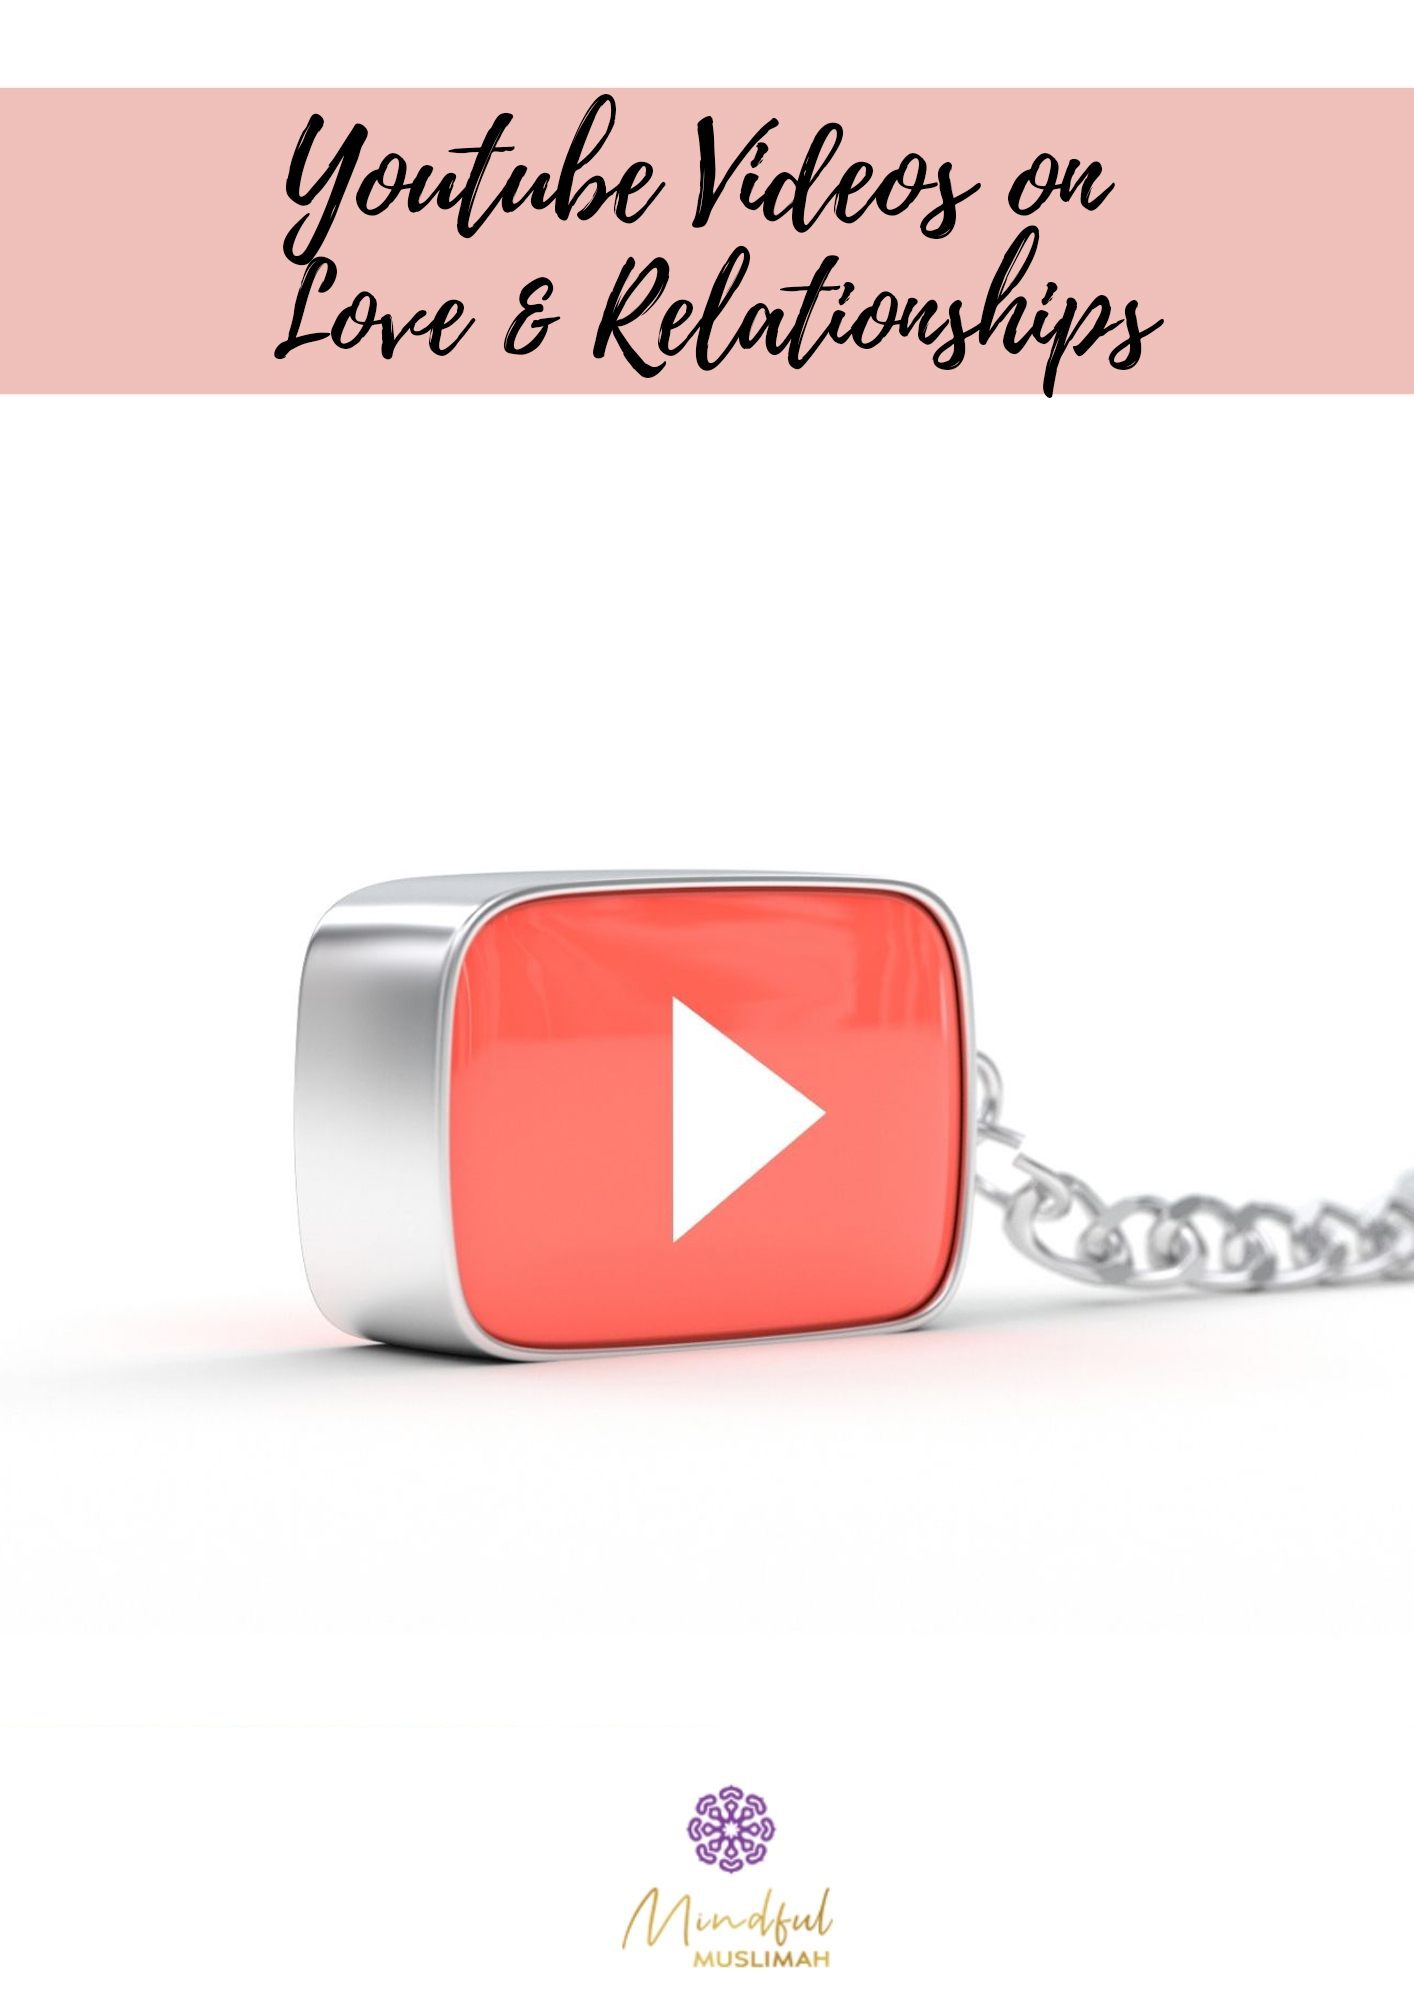 Videos on loves an relationships